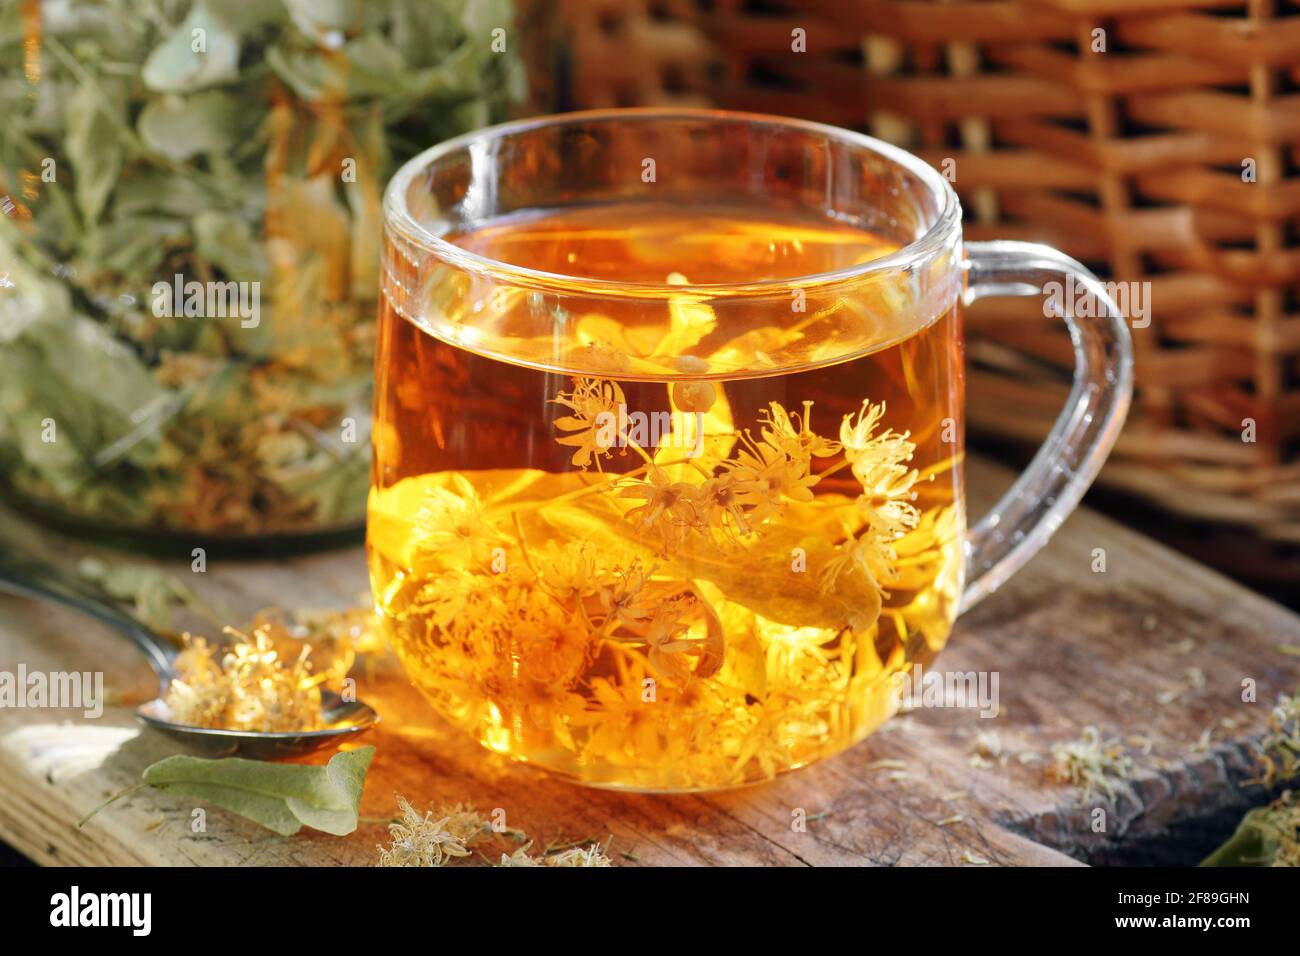 Linden herbal tea with flowers in a glass cup on wooden rustic board with lime blossom dry herb nearby, closeup, drink for relaxation, mental health, Stock Photo